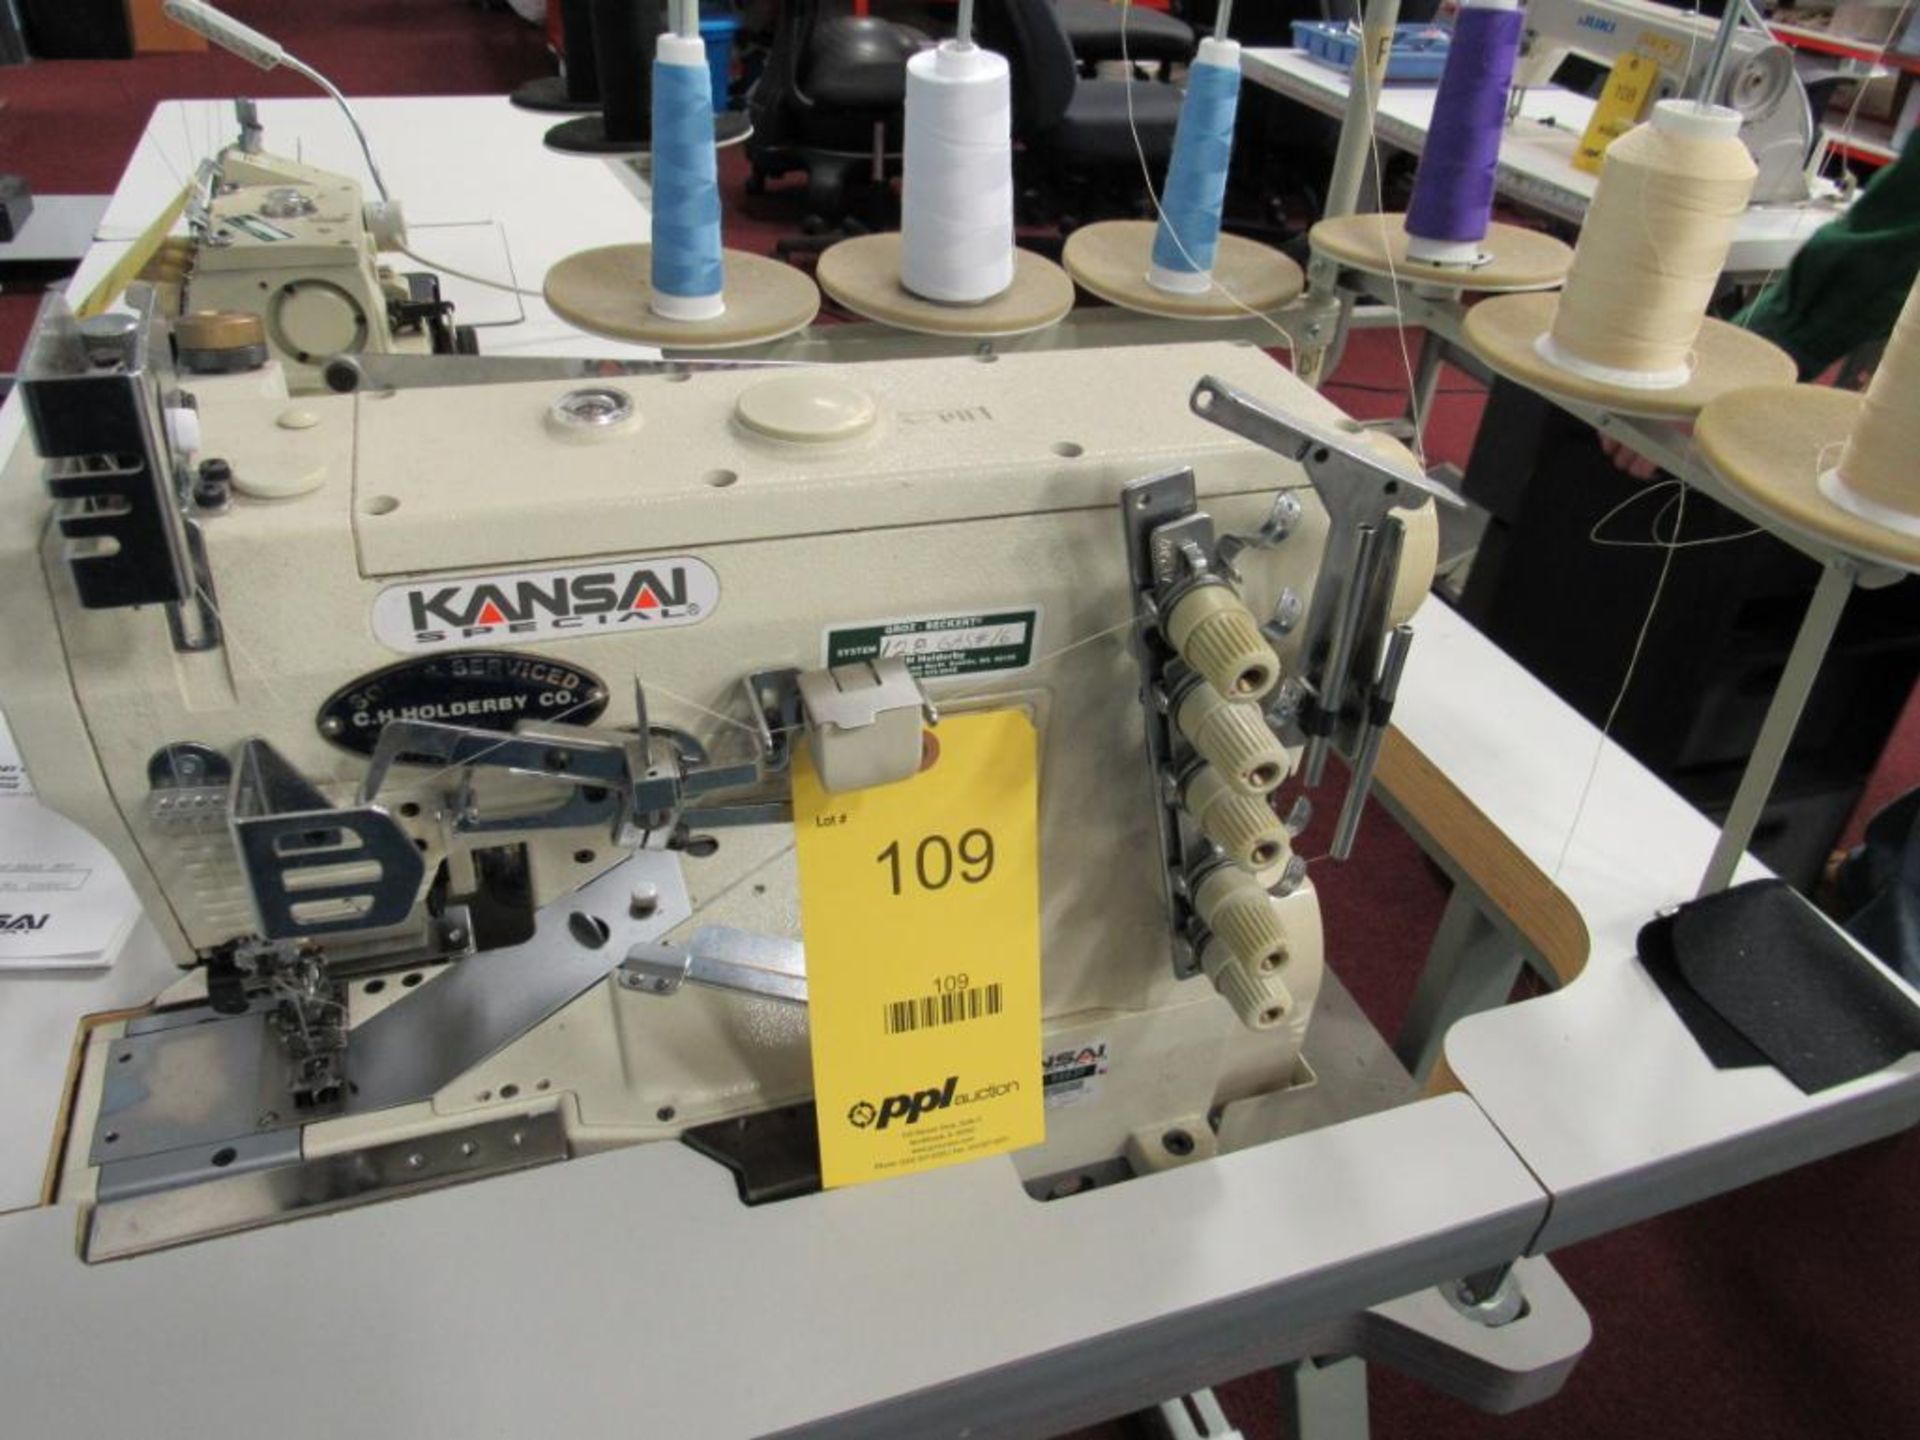 Kansai Special Model RX-9803P Industrial Sewing Machine - Image 2 of 2